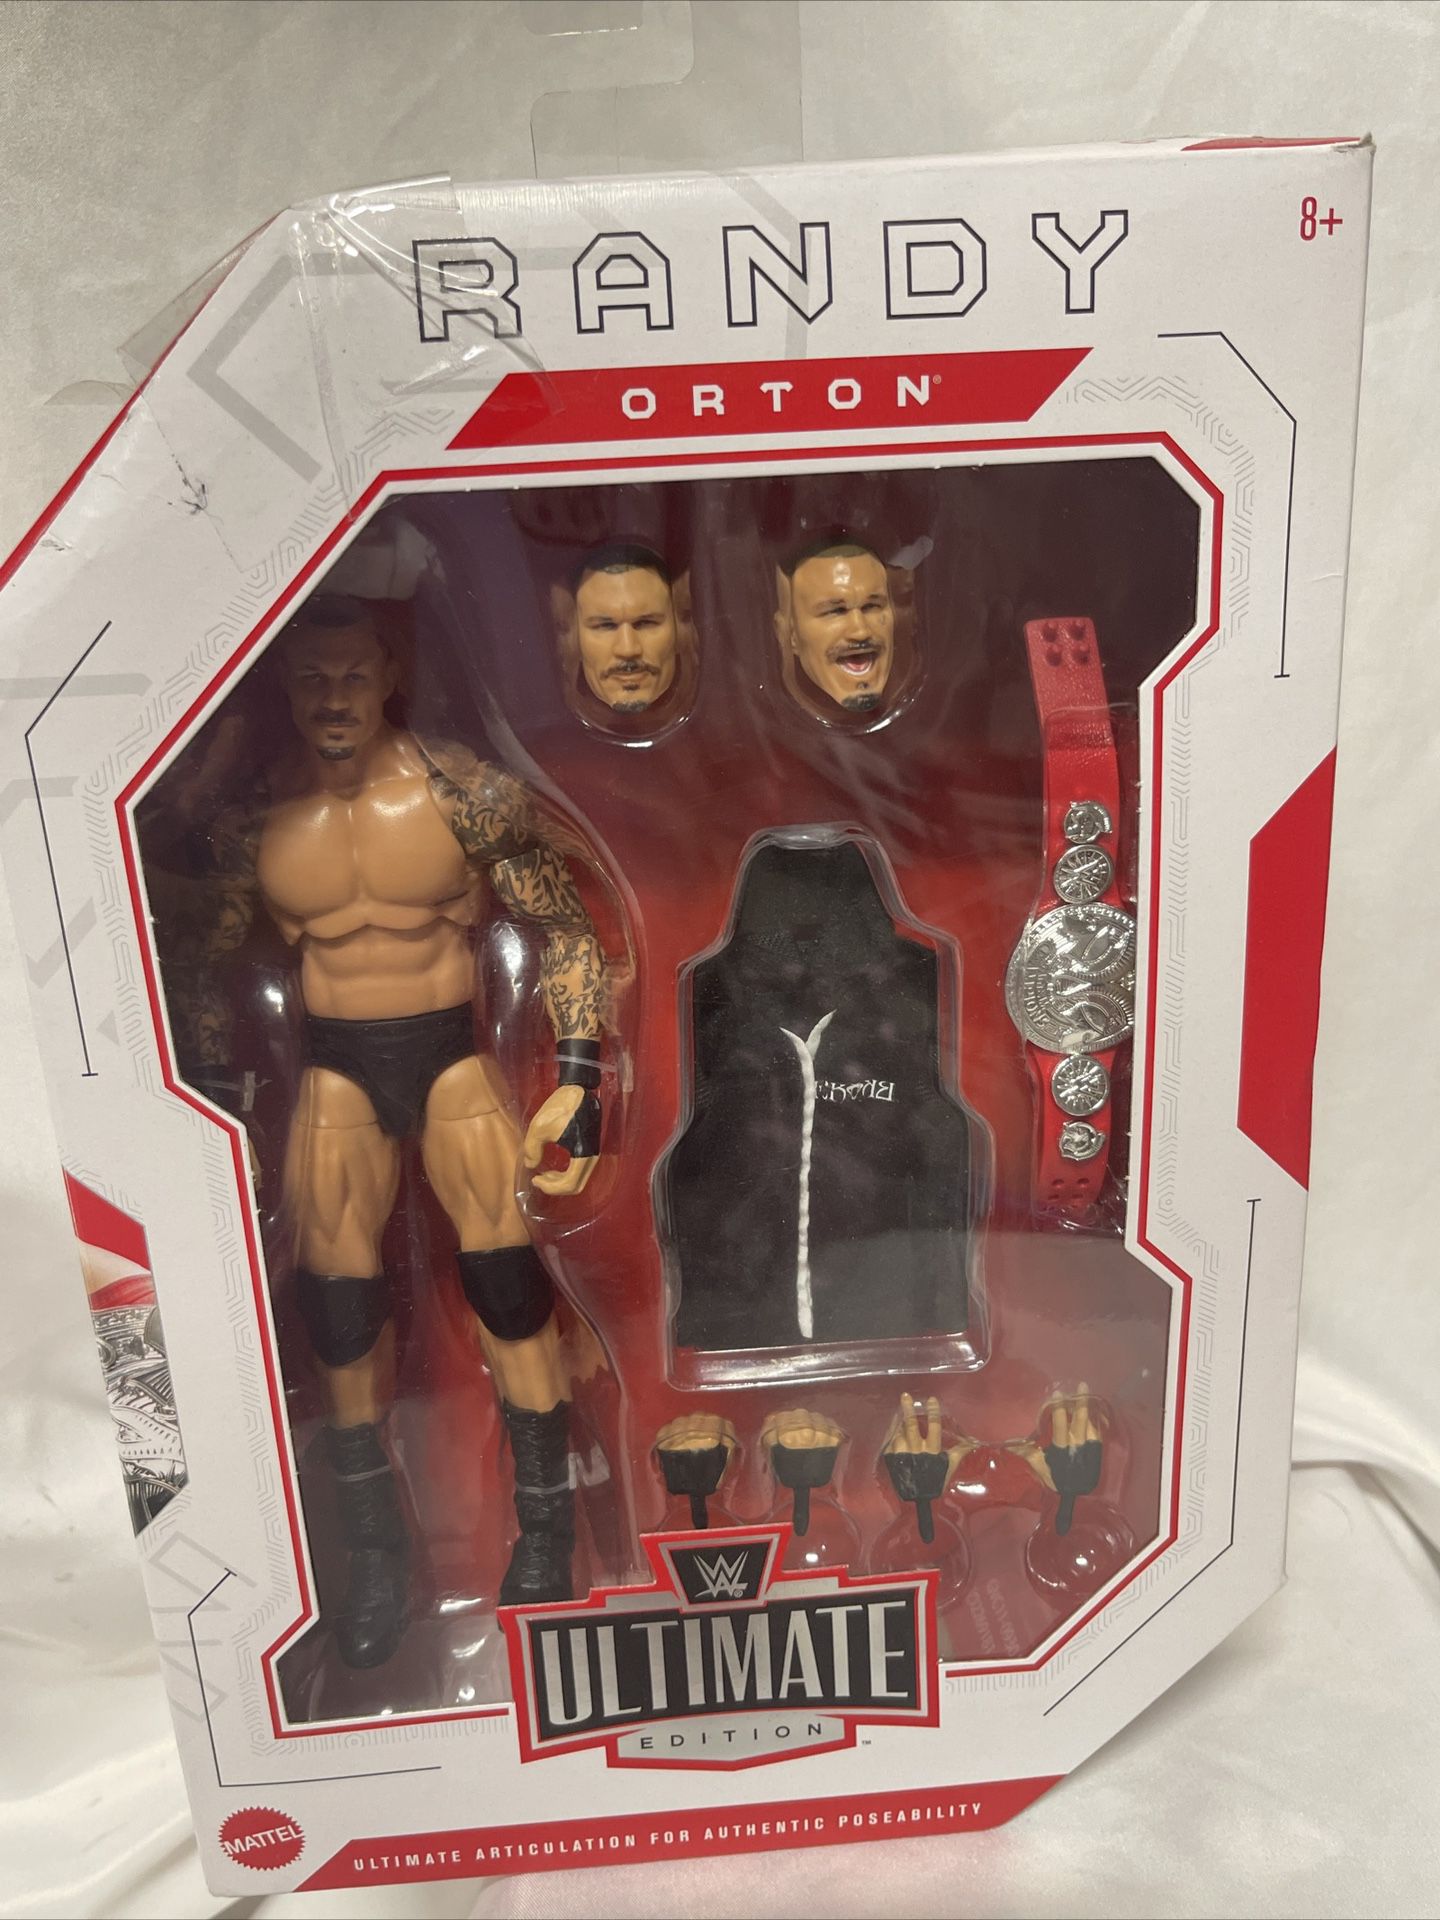 WWE Ultimate Edition RANDY ORTON Mattel See Pictures Box Damage